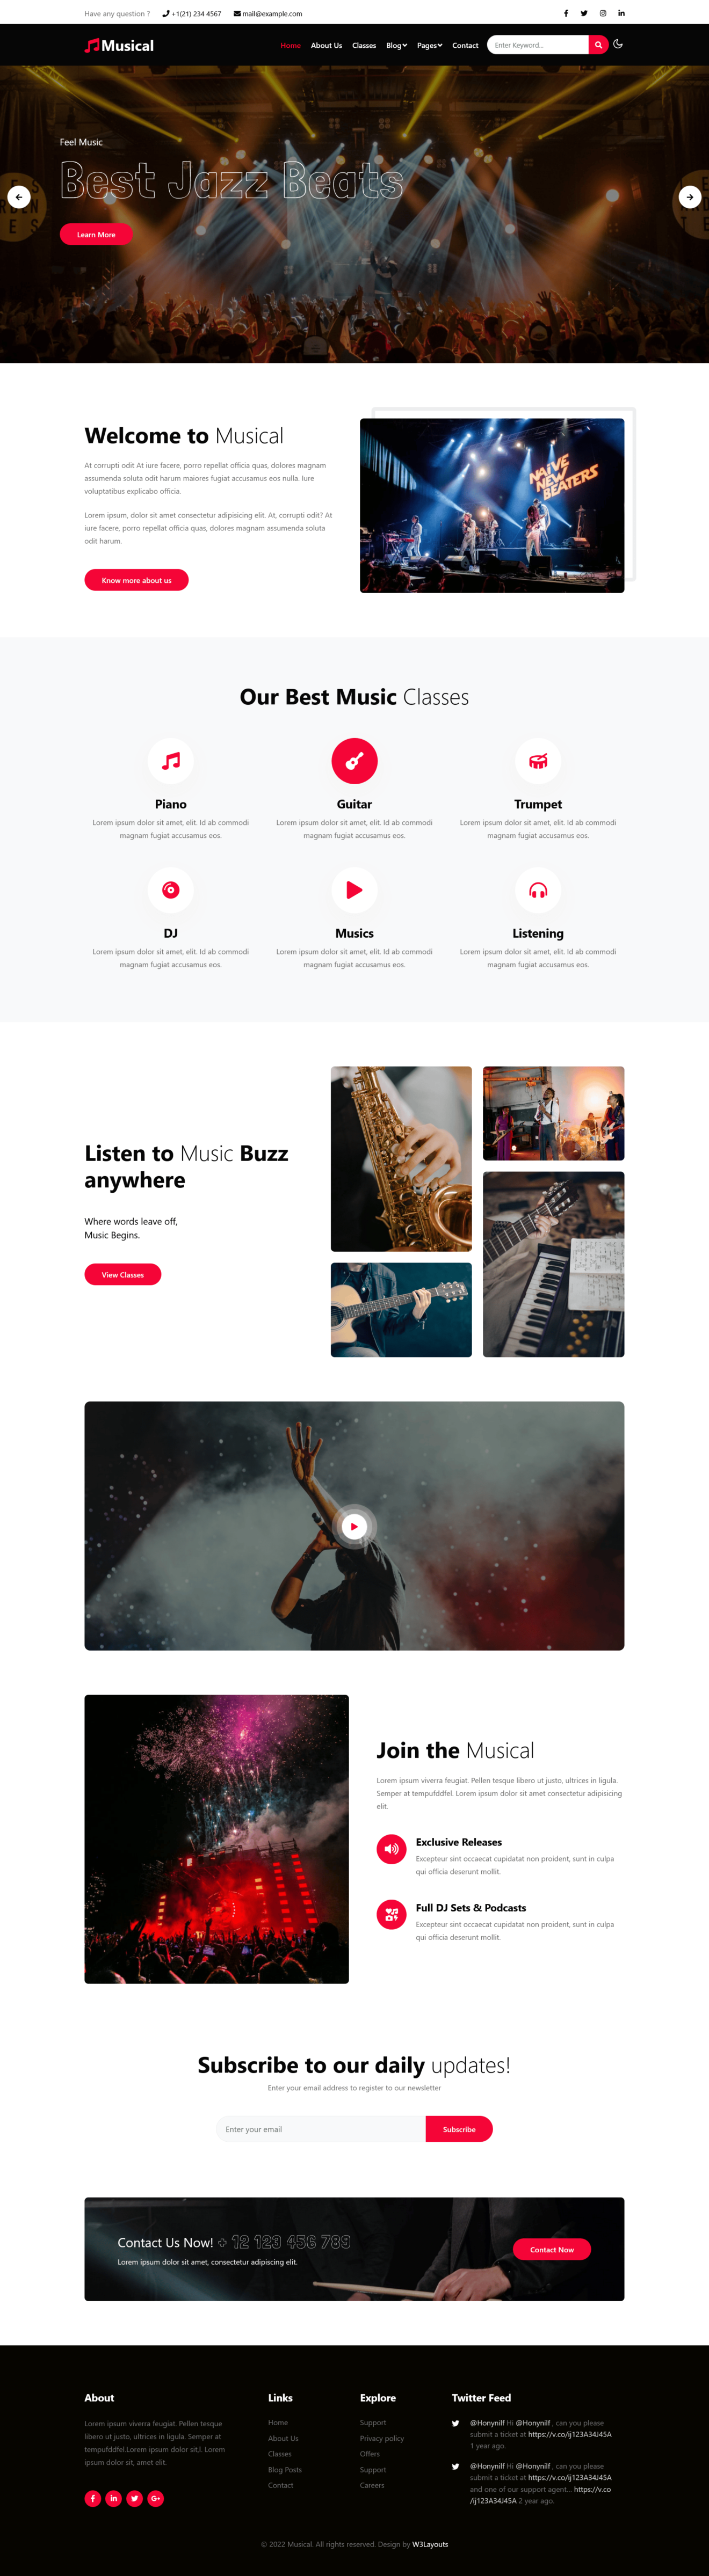 Musical a music category entertainment template home page full